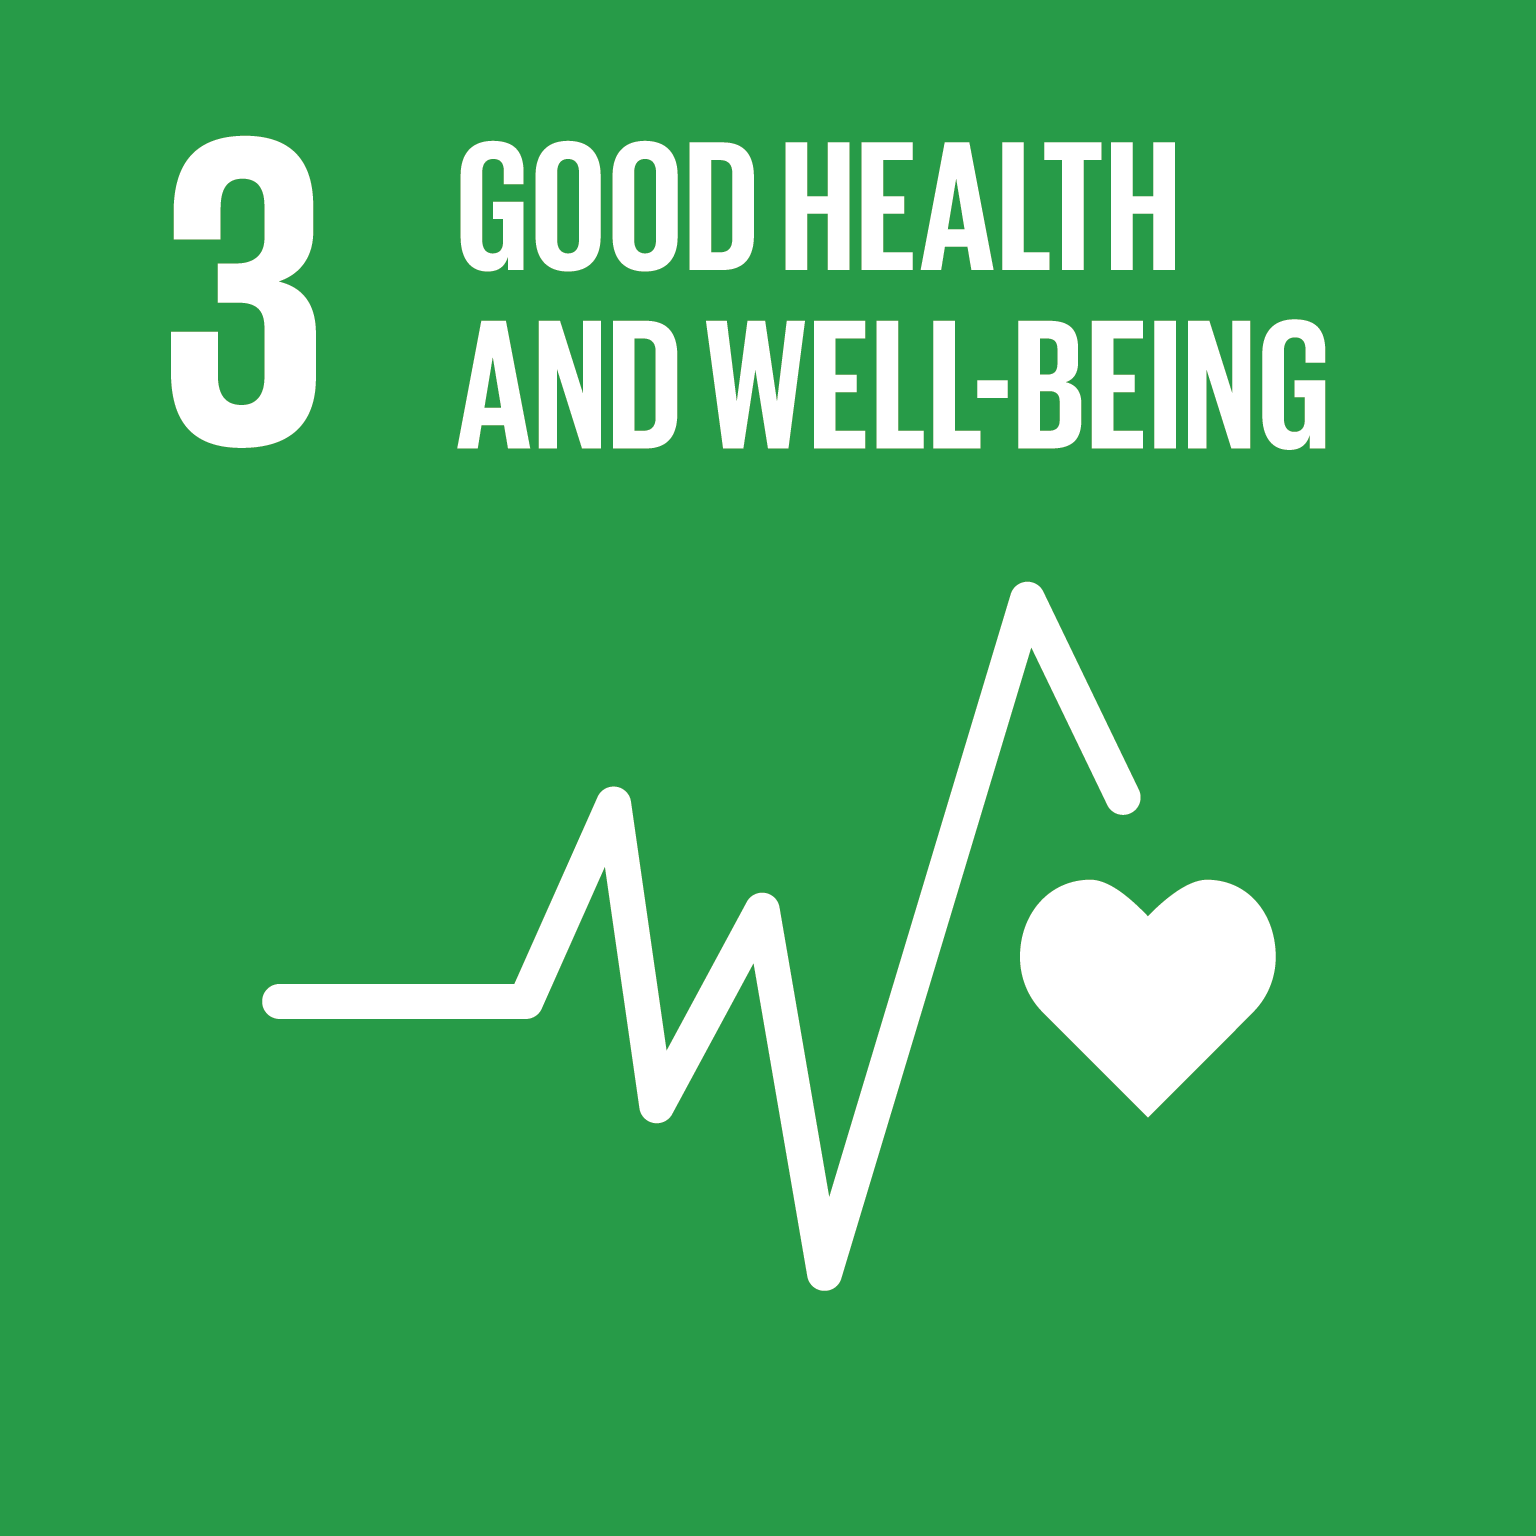 Navigate to Goal 3: Good Health and Well Being